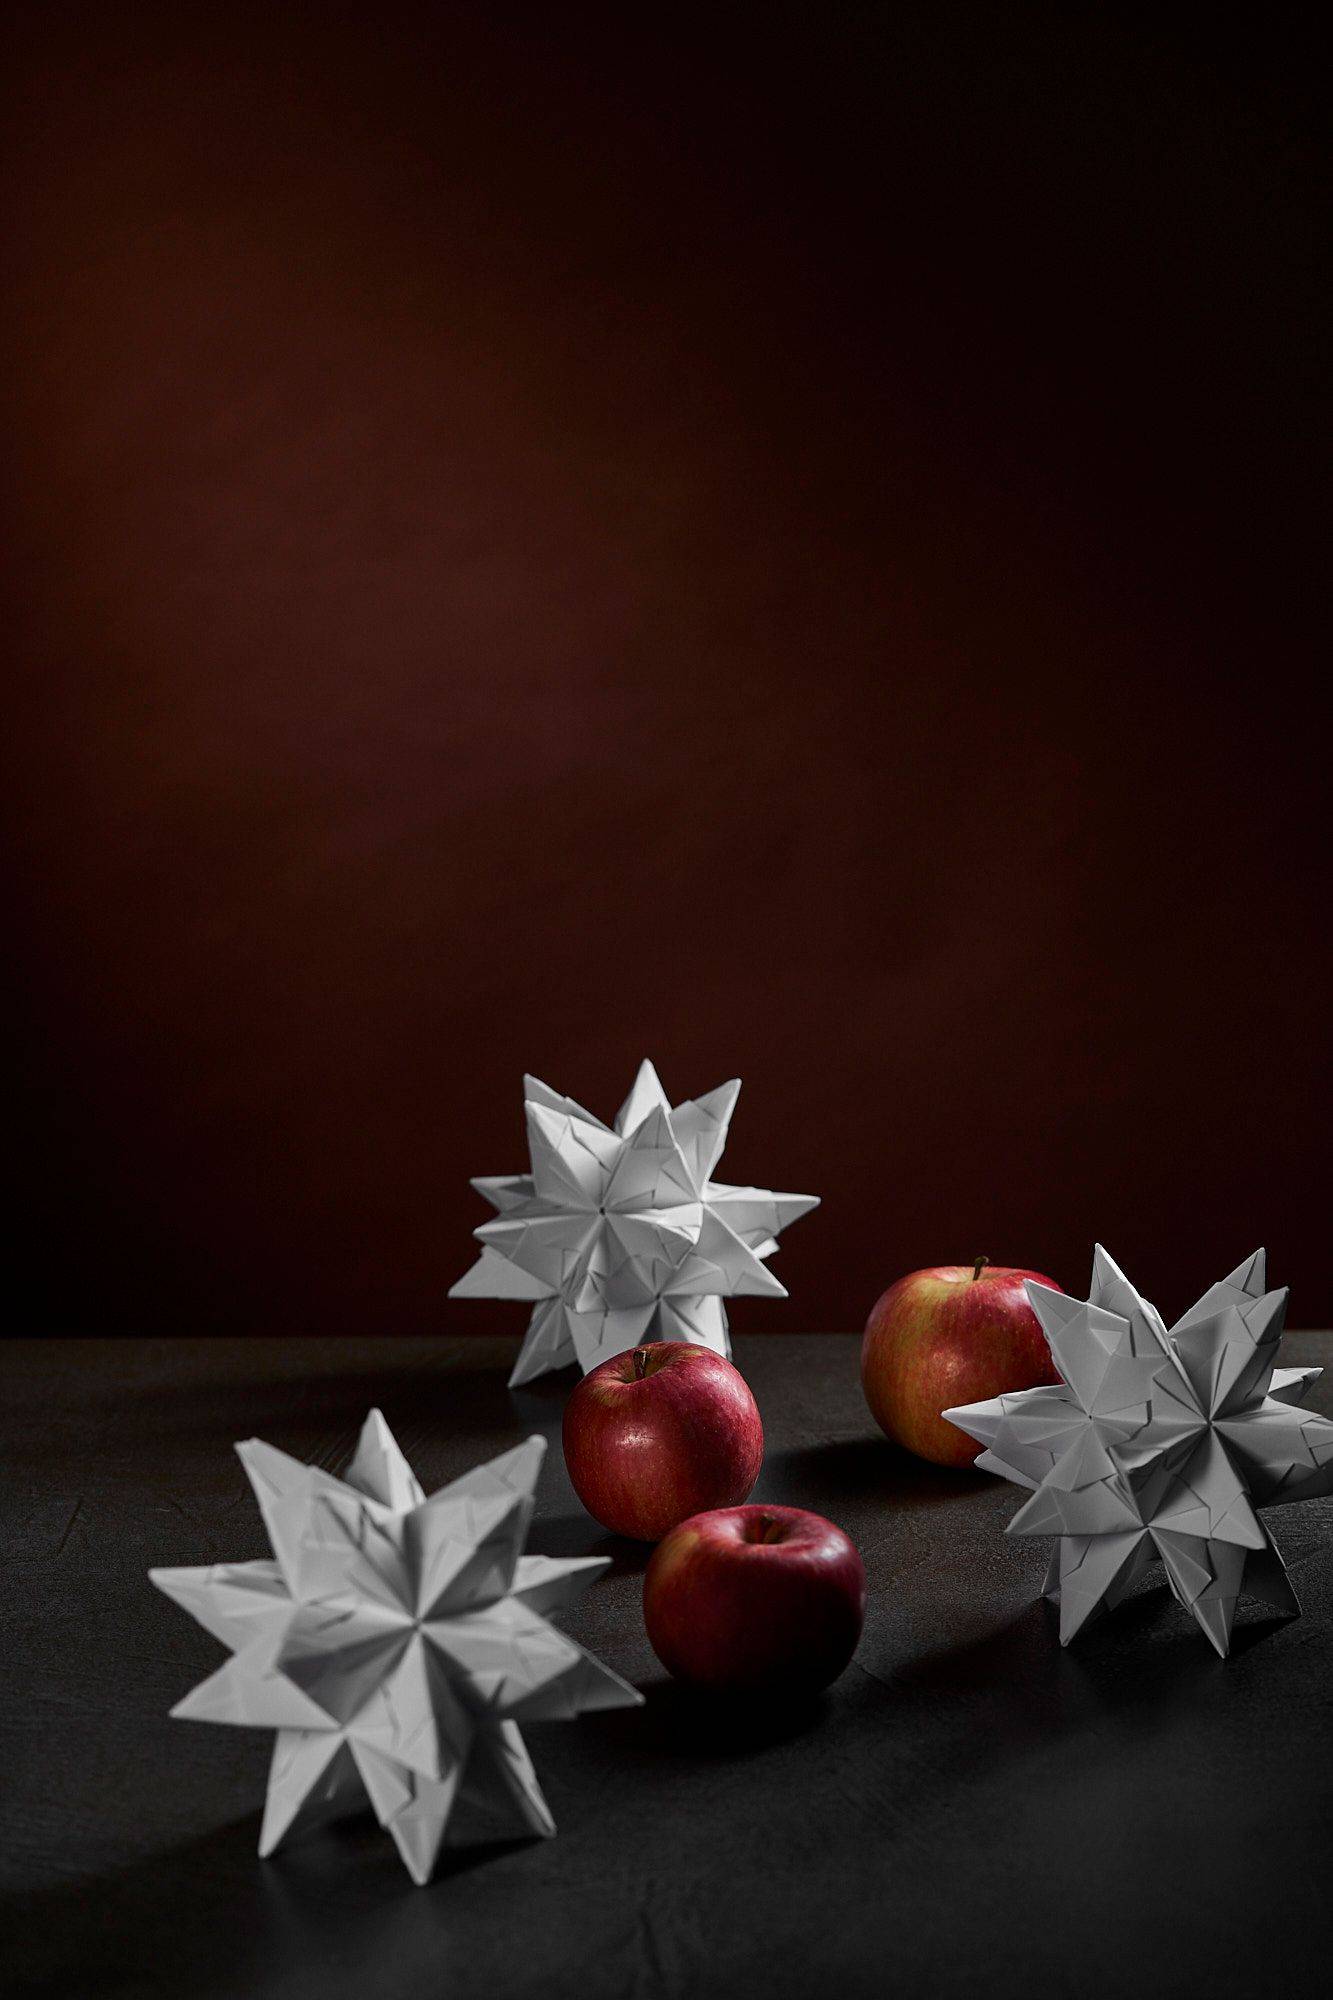 red apples and origami stars with brown background